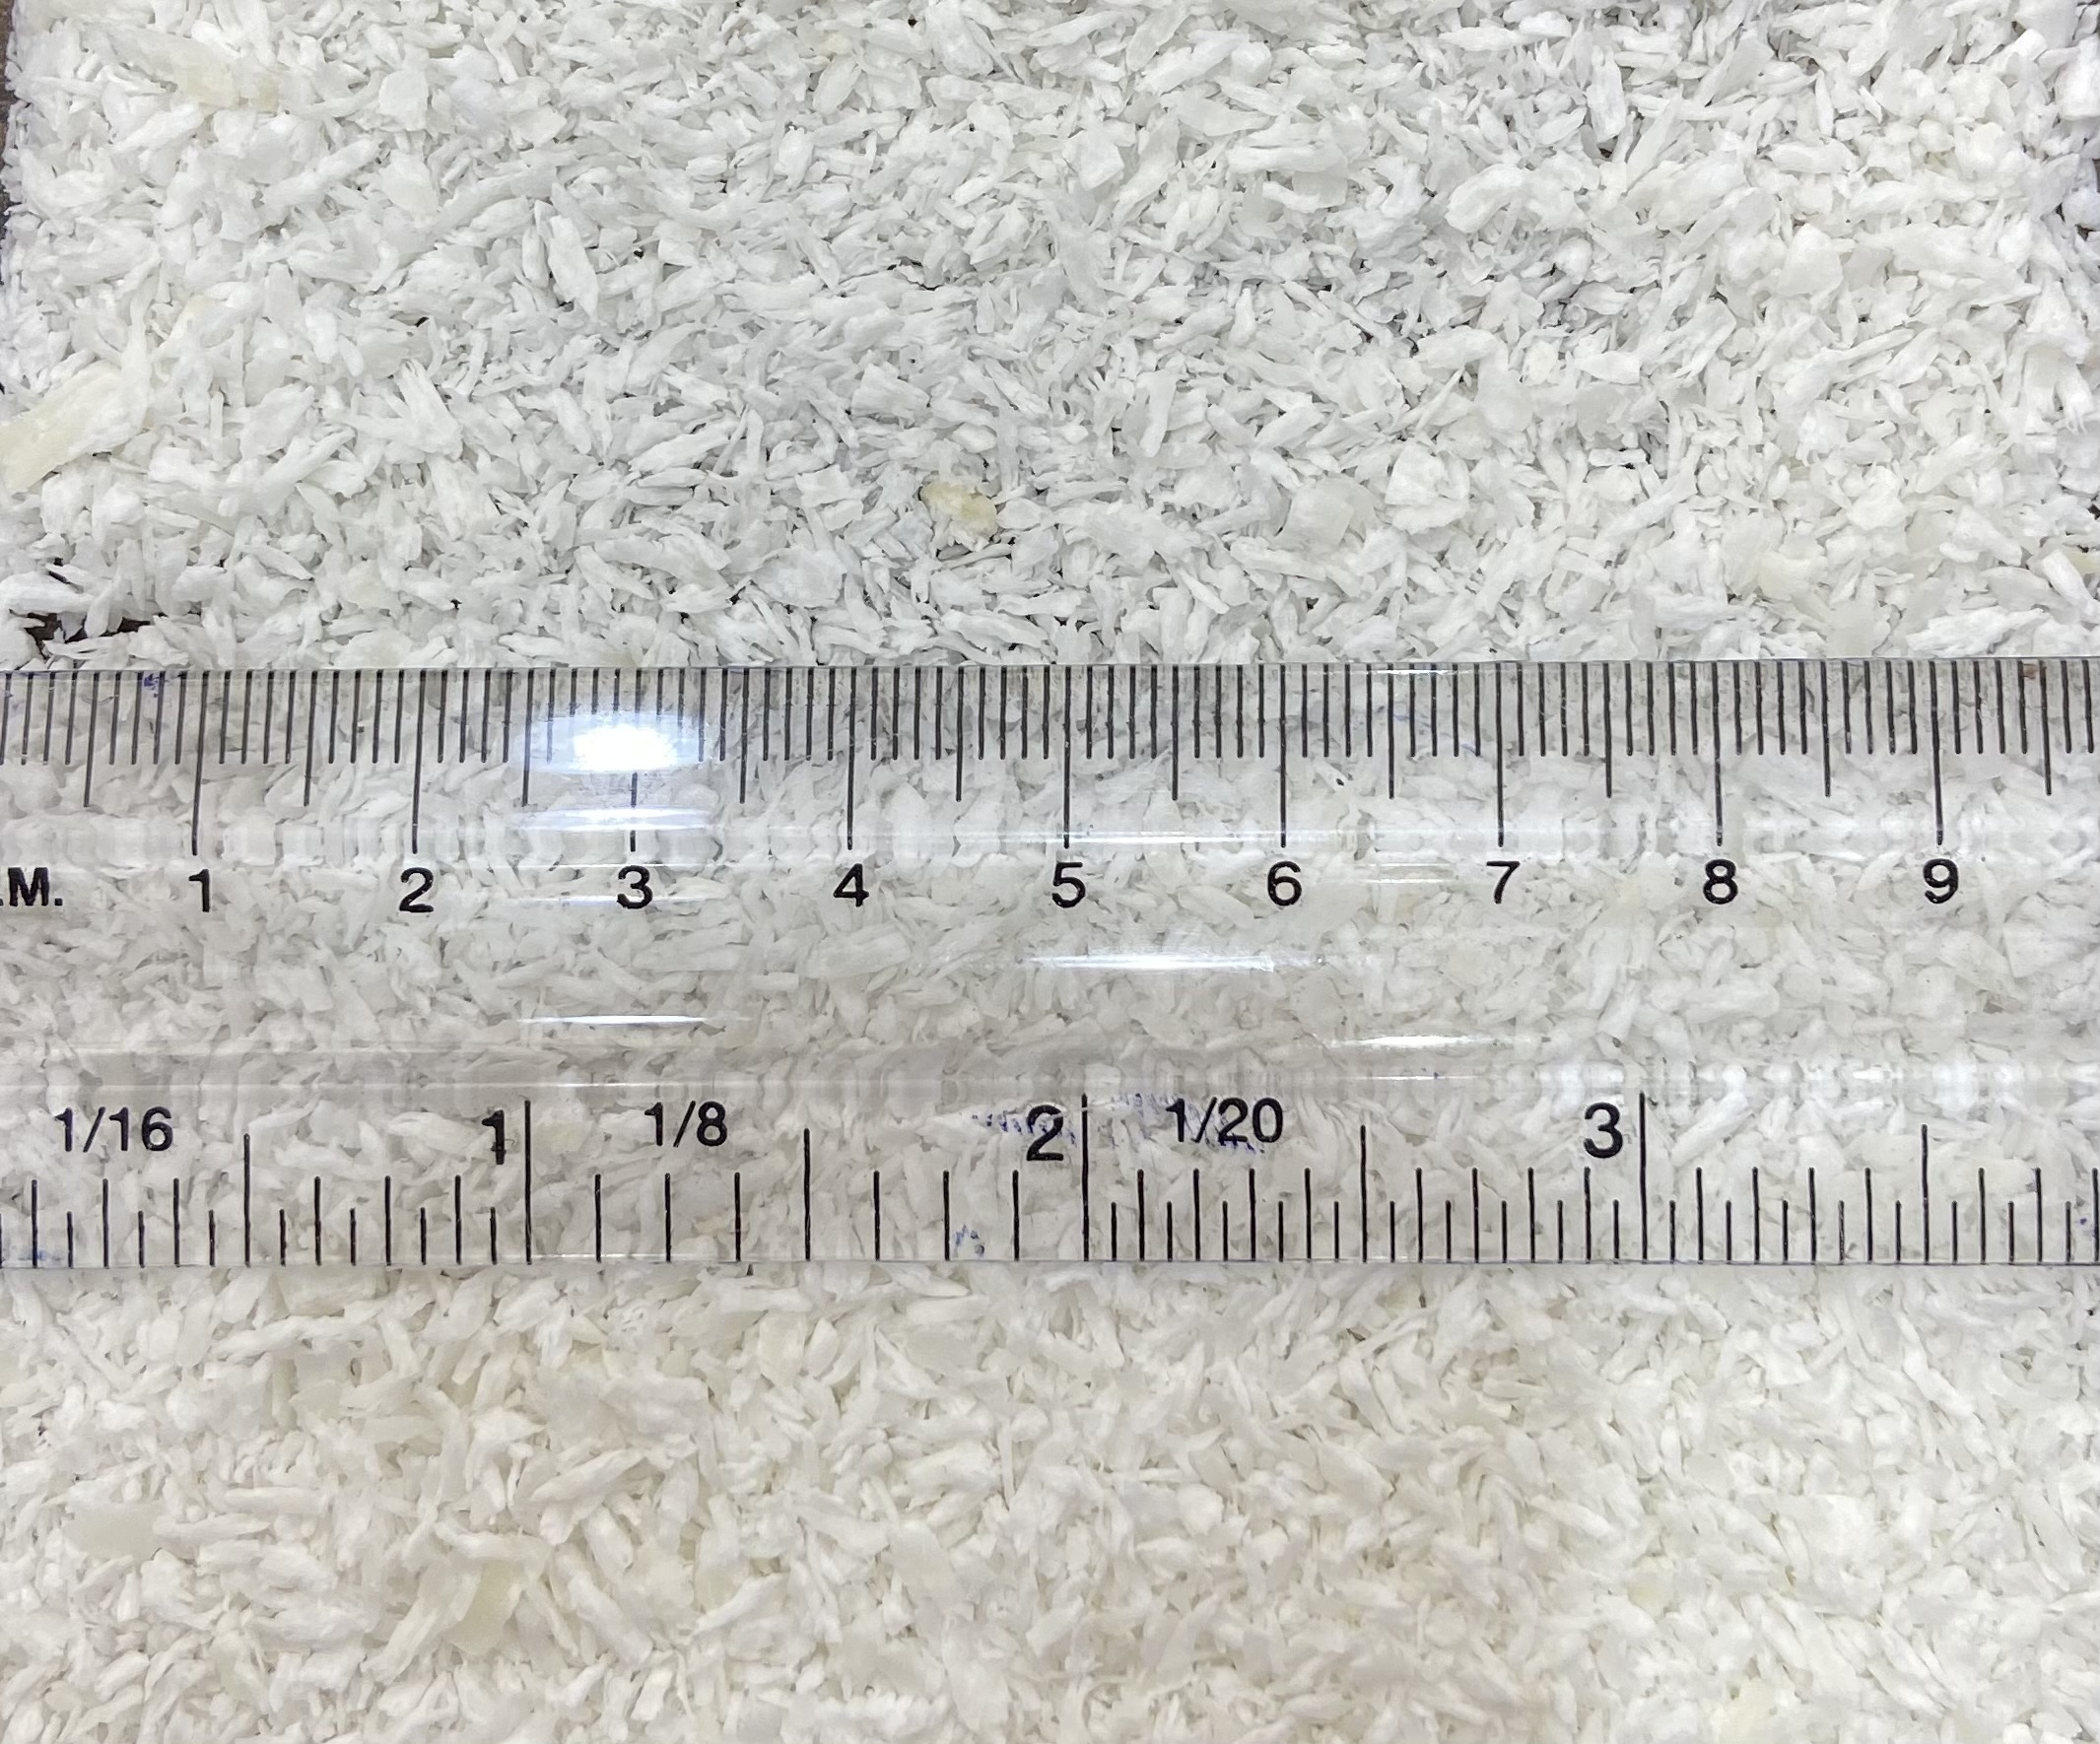 Size of desiccated coconut measured by ruler showing the size in CM.